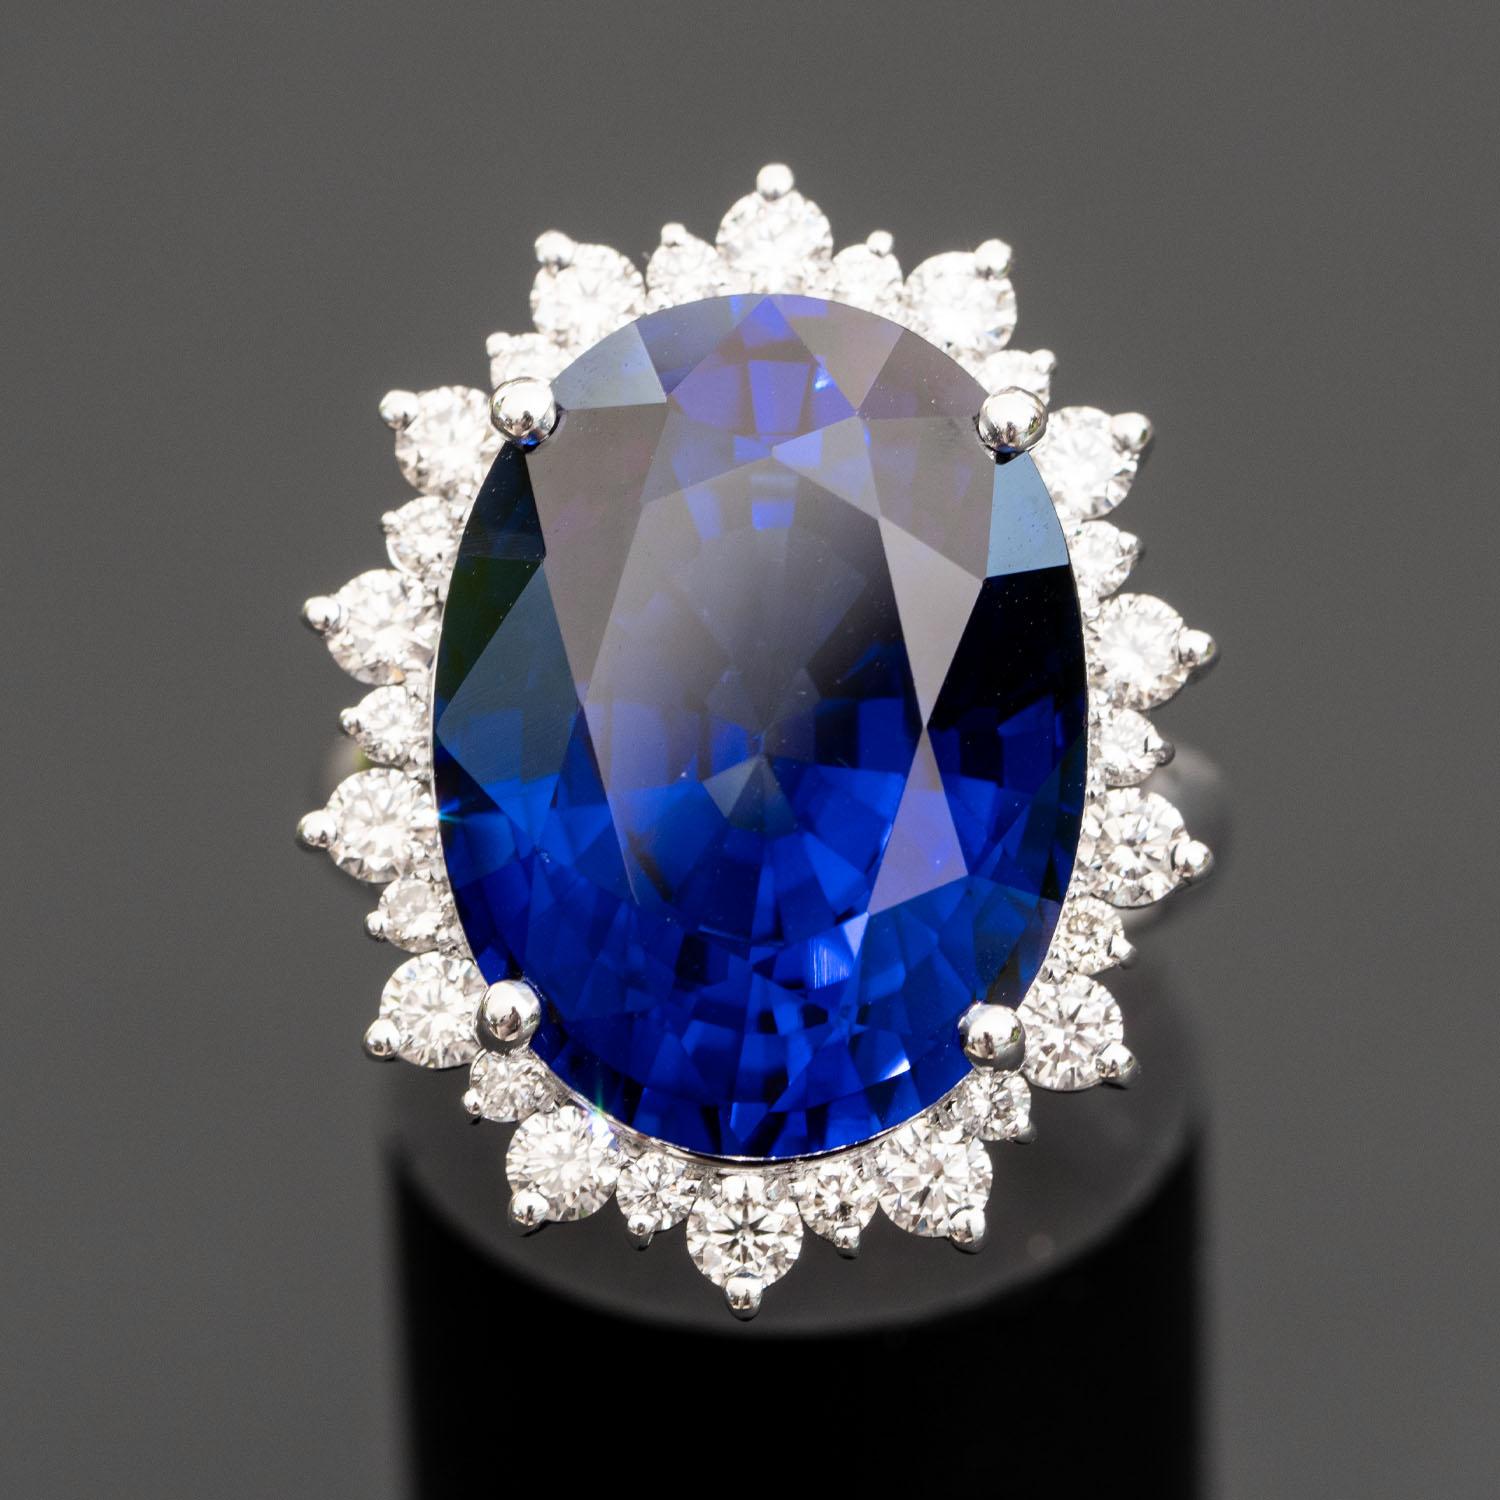 This gorgeous blue sapphire ring will impress everyone around you. It features a large oval 25.60 carat gemstone, adorned with 1.30 carat natural diamonds.

Diffused Sapphire
Shape: Oval Sapphire                                                      